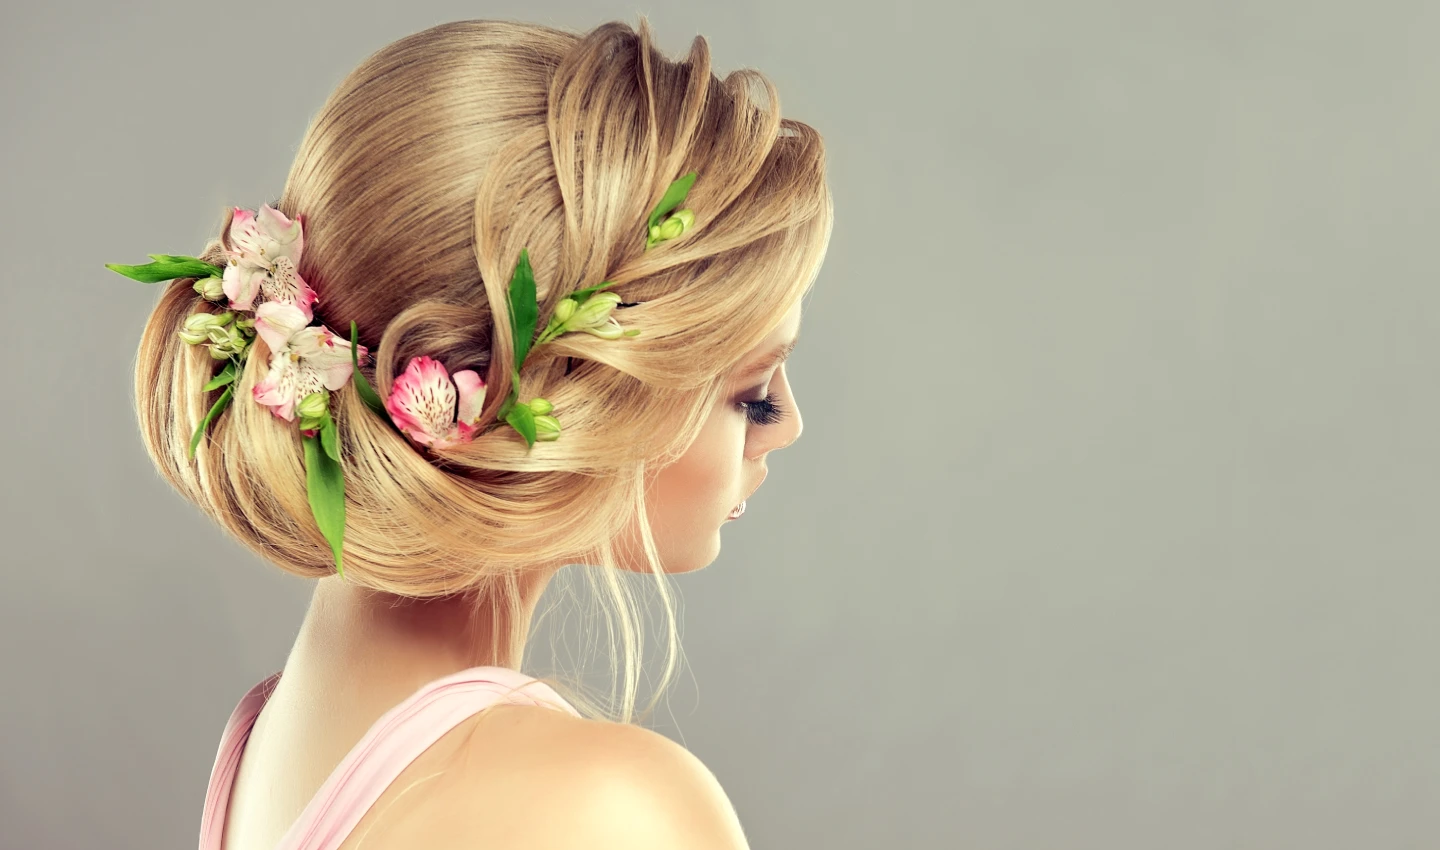 Young and beautiful woman with blonde hair styled in an elegant updo with natural pink blossoms and flowers inserted into the hairdo.